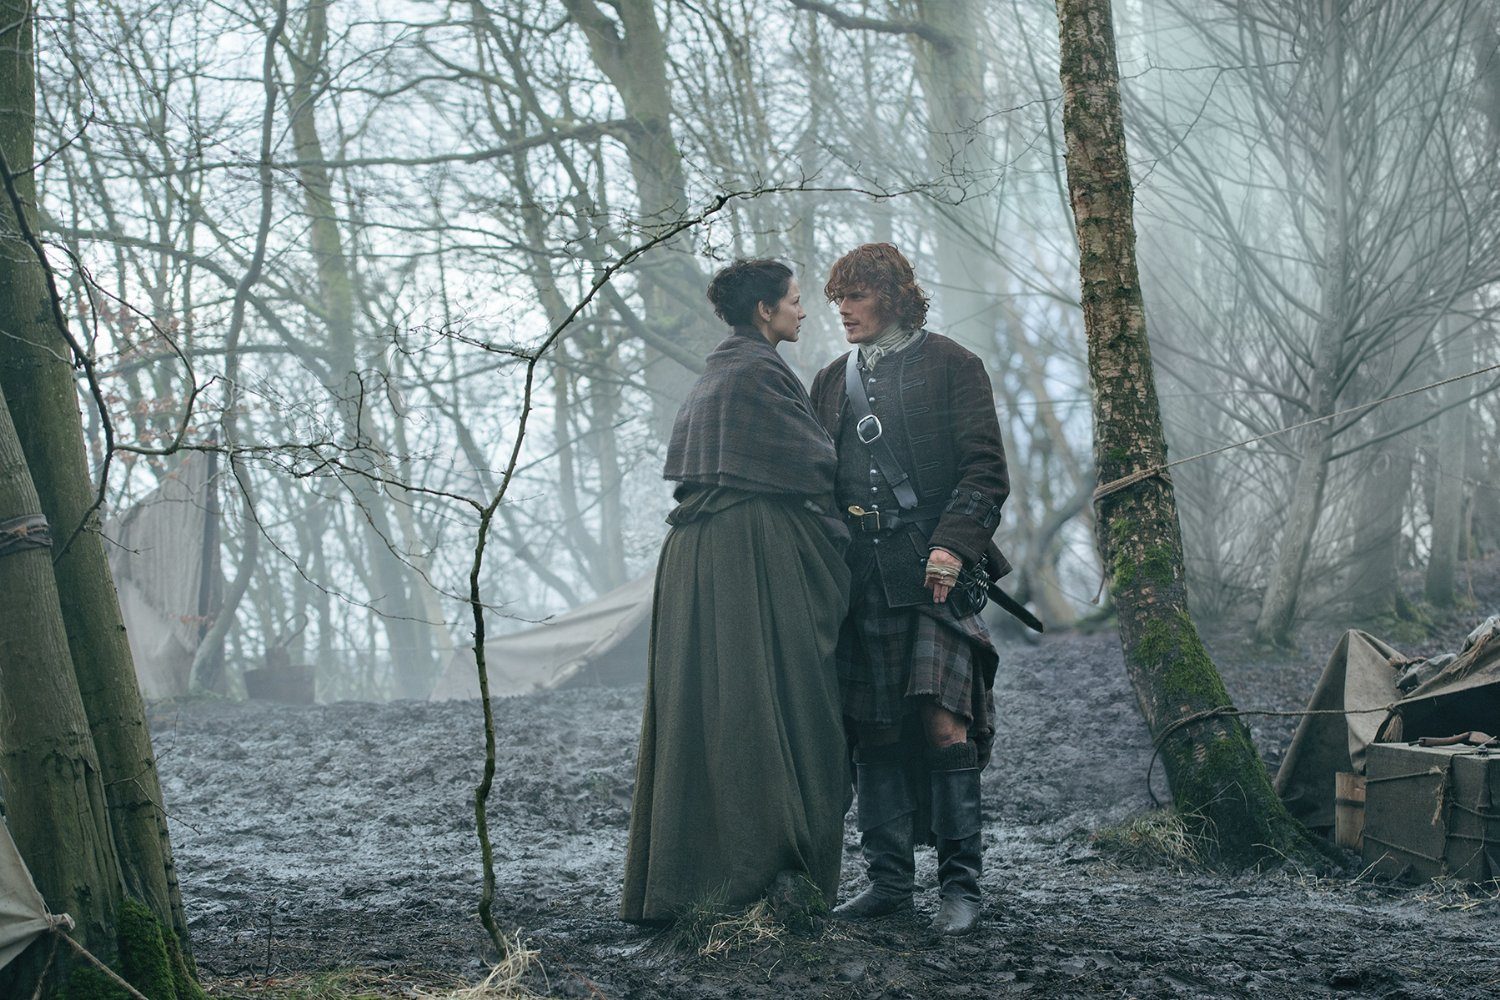 Claire and Jamie in the Season 2 finale of Outlander "Dragonfly in Amber"